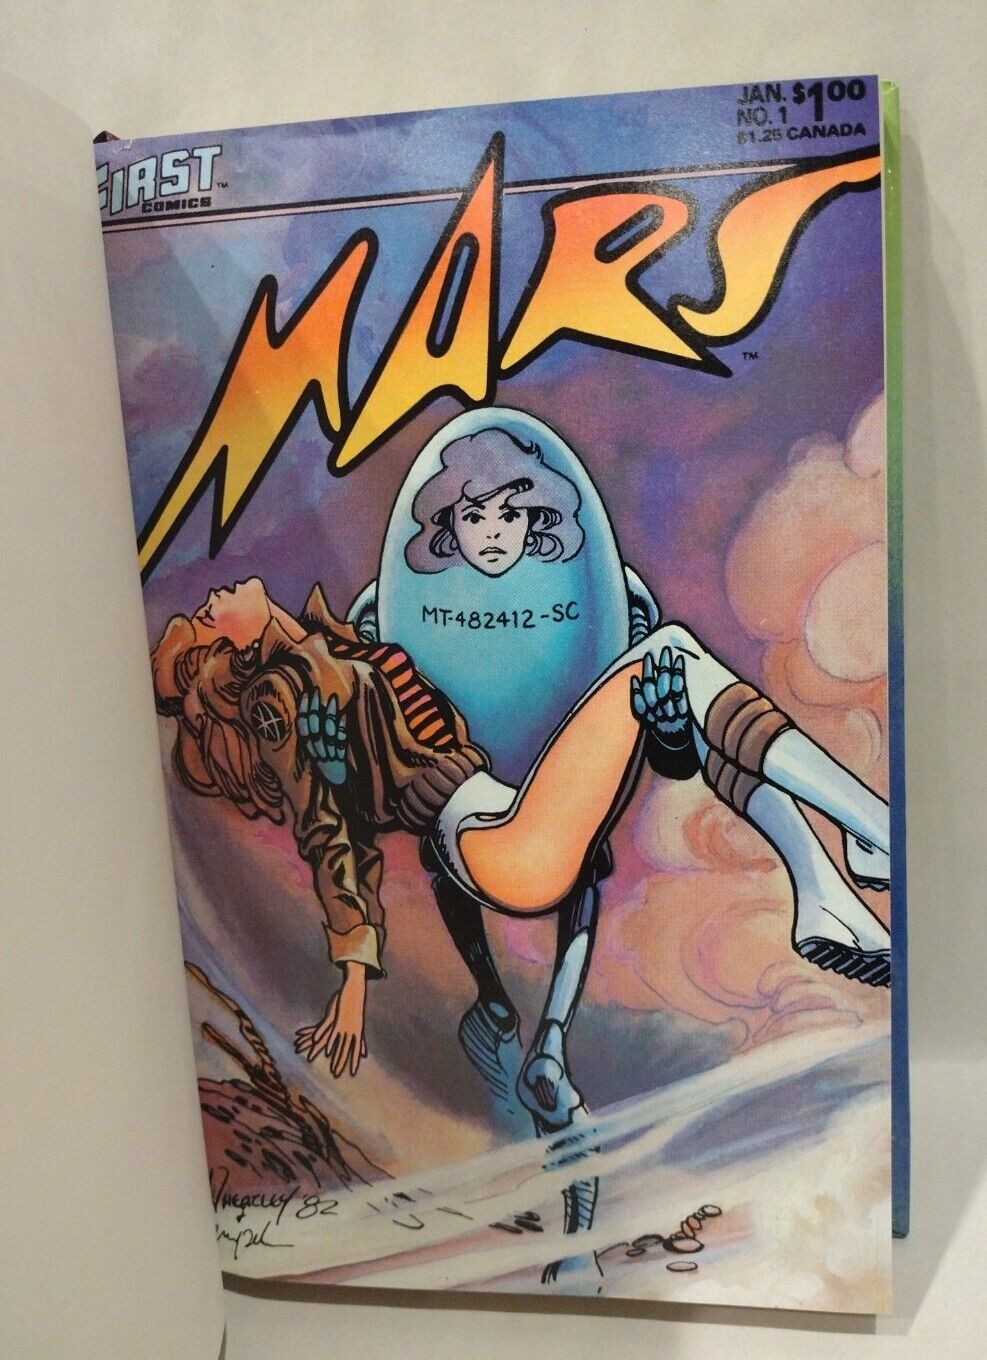 MARS (1983) Complete Collection Custom Bound First Comics Hardcover ARG New HC